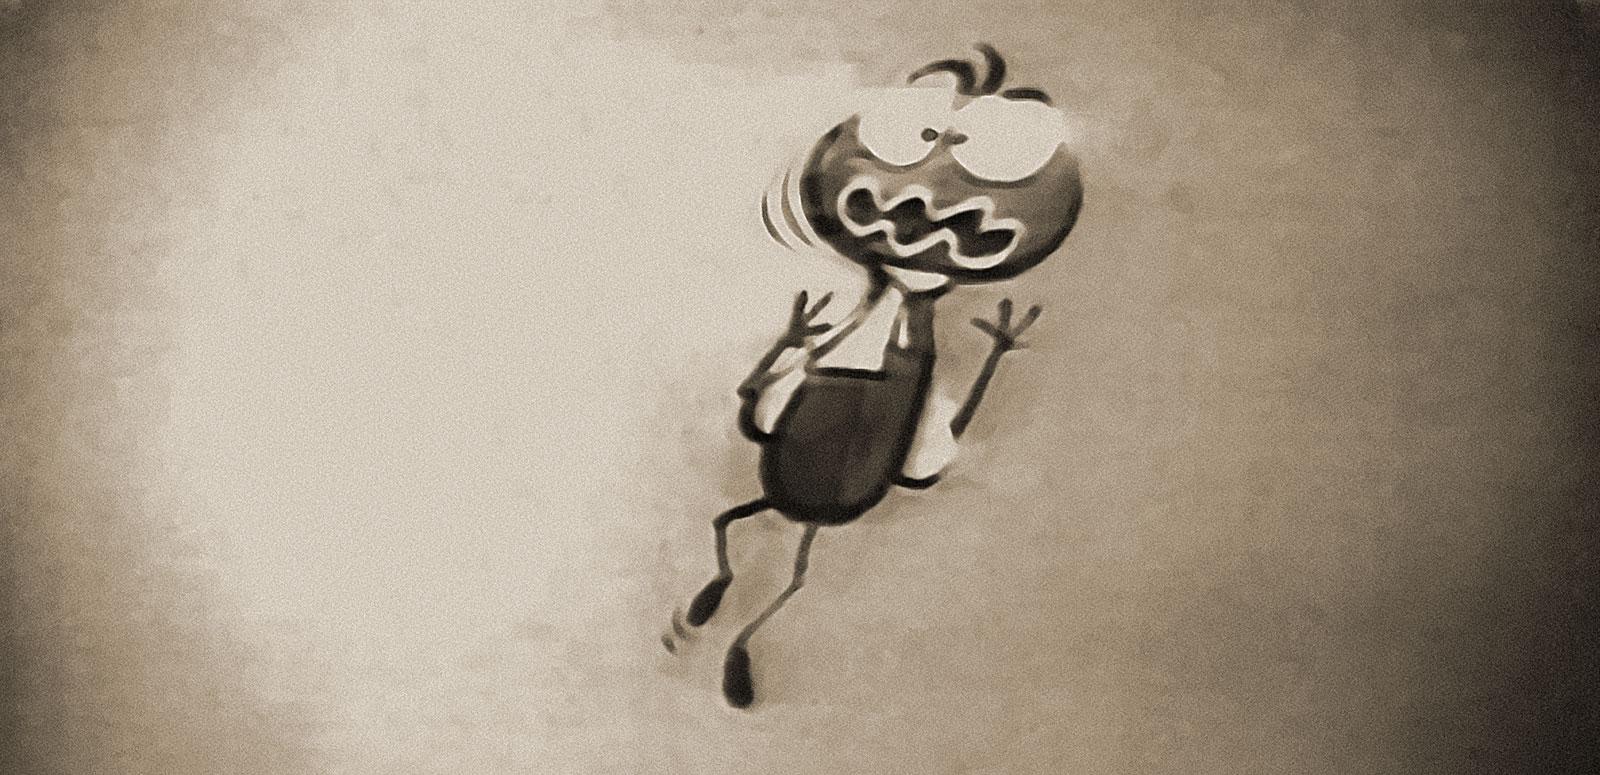 A panic-stricken Louie the Fly from the 1962 animated Mortein pest spray TV advertisement